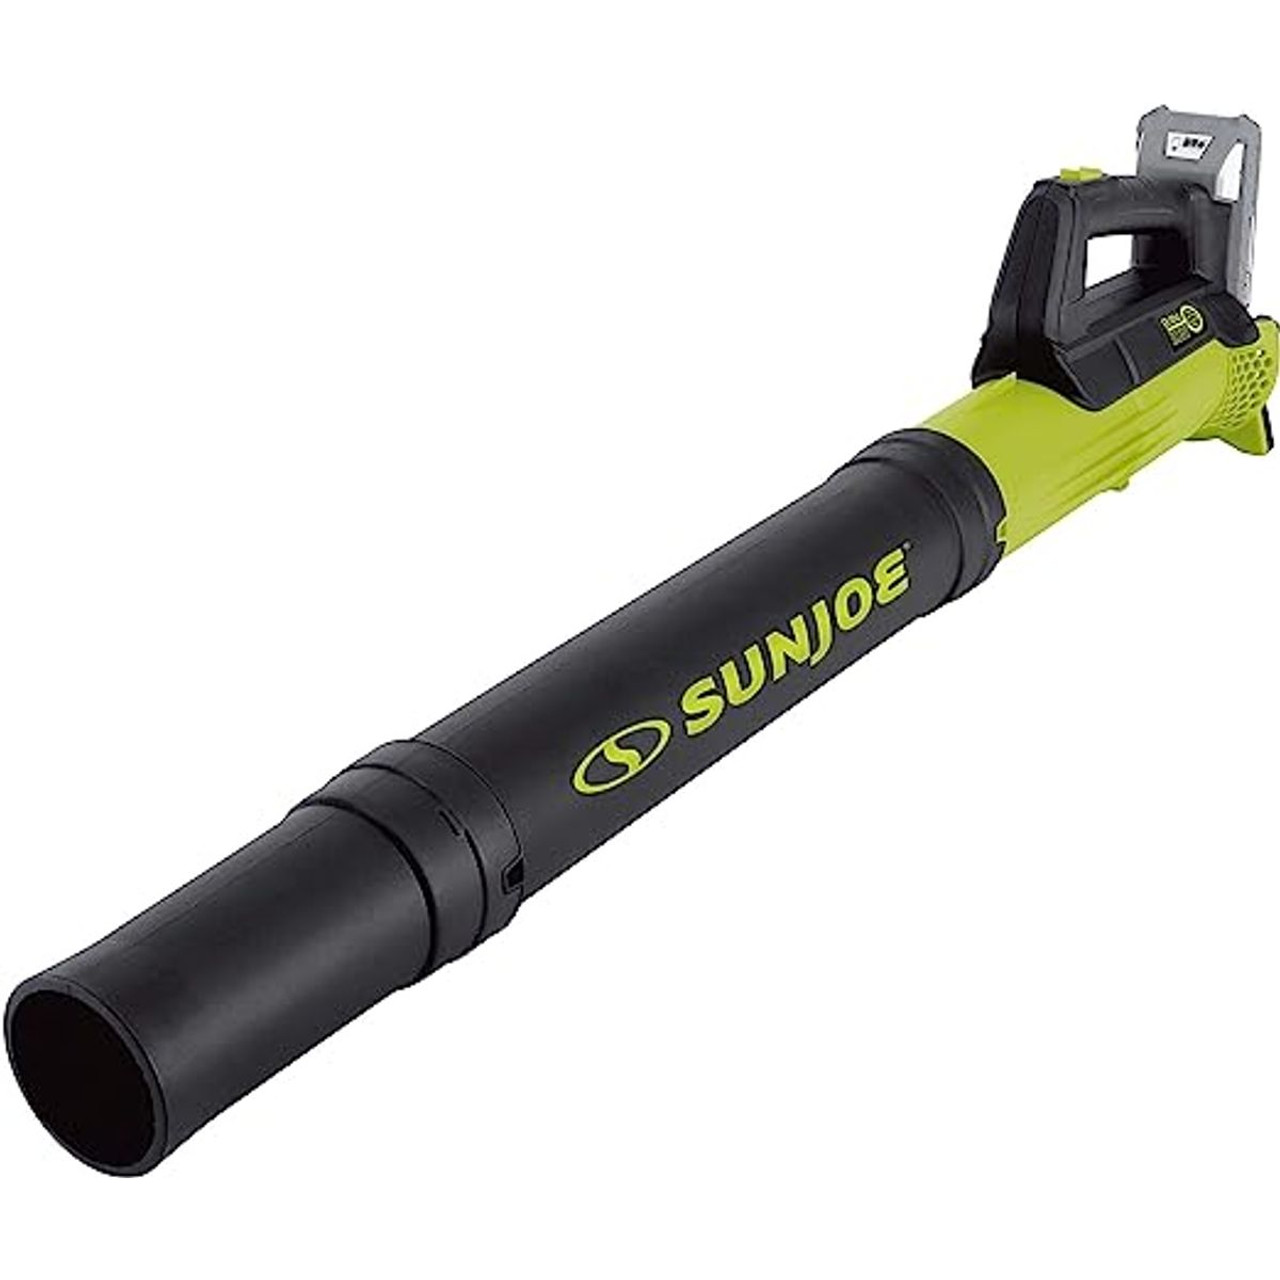 Sun Joe®  24V iON+ Jet Blower Cordless with 2.0-Ah Battery and Charger, 24V-TB-LTE product image